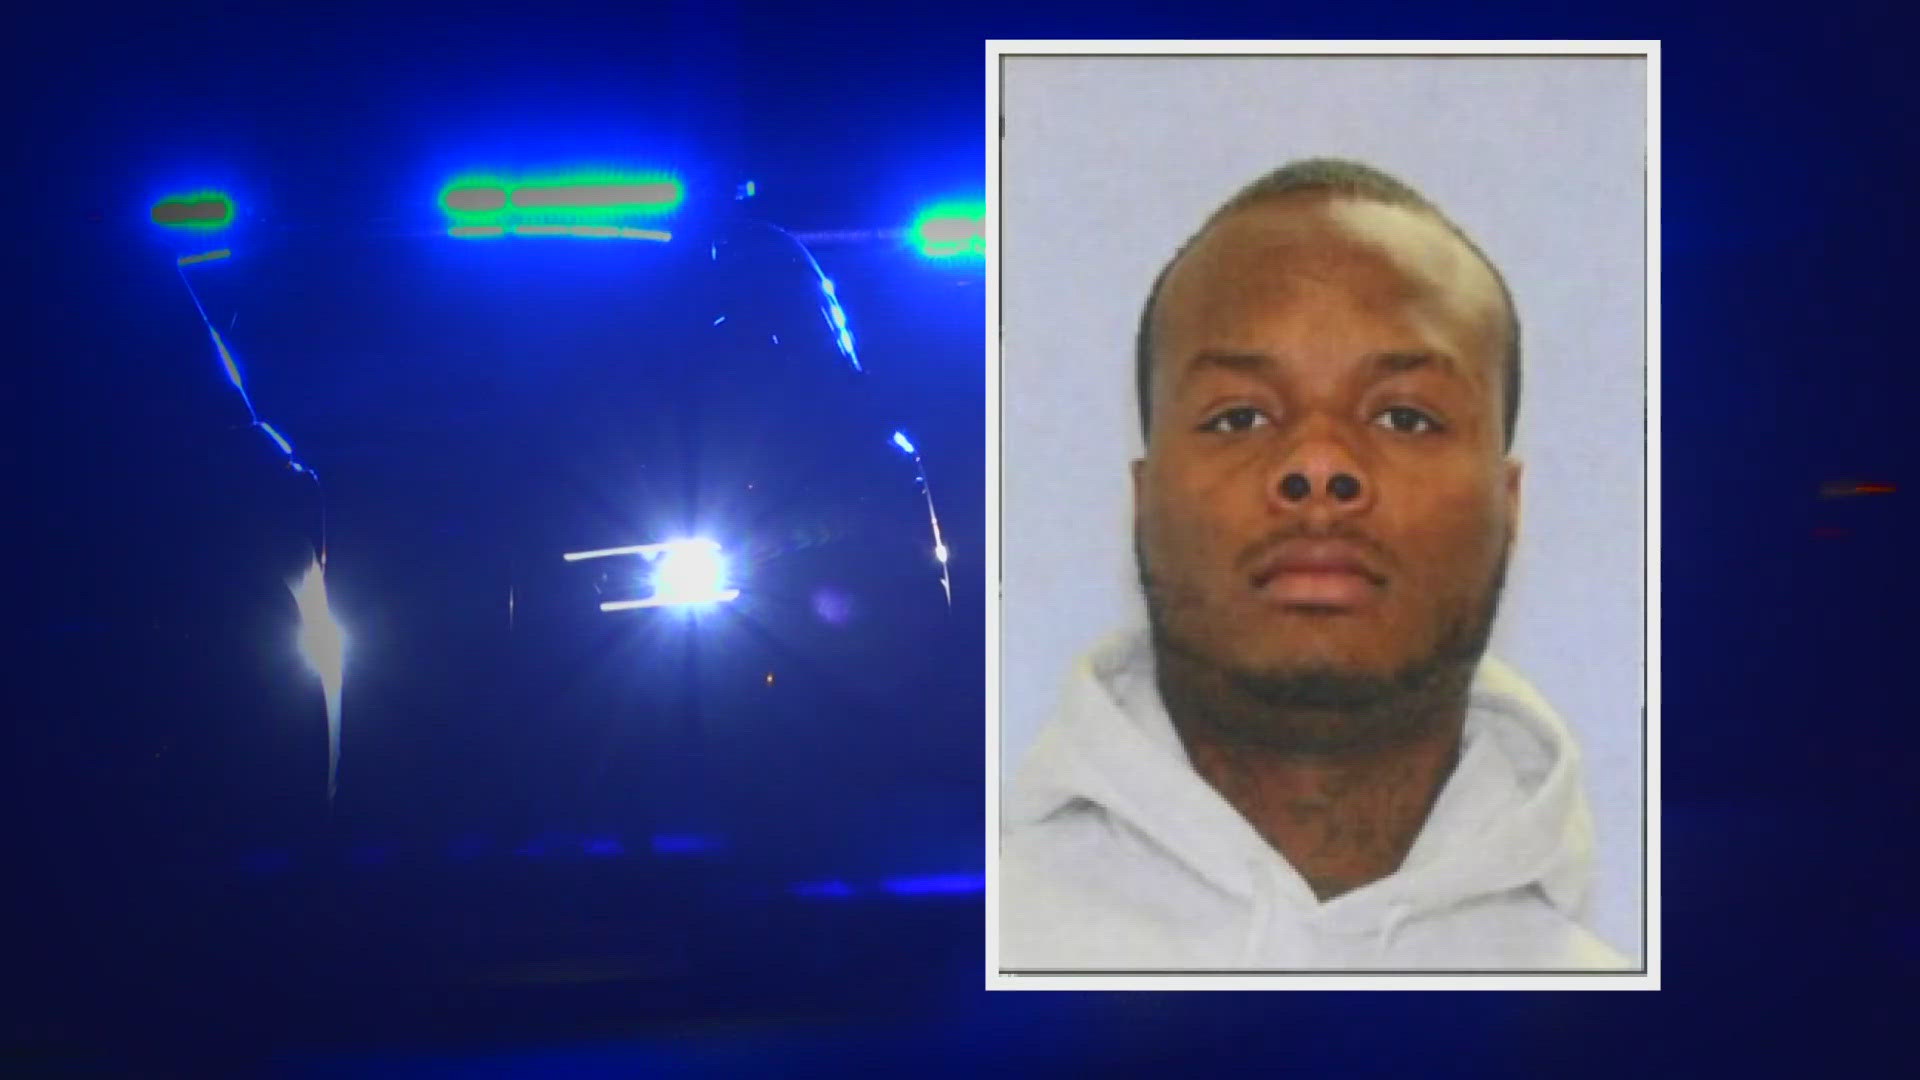 24-year-old Deshawn Anthony Vaughn was found dead after a standoff.